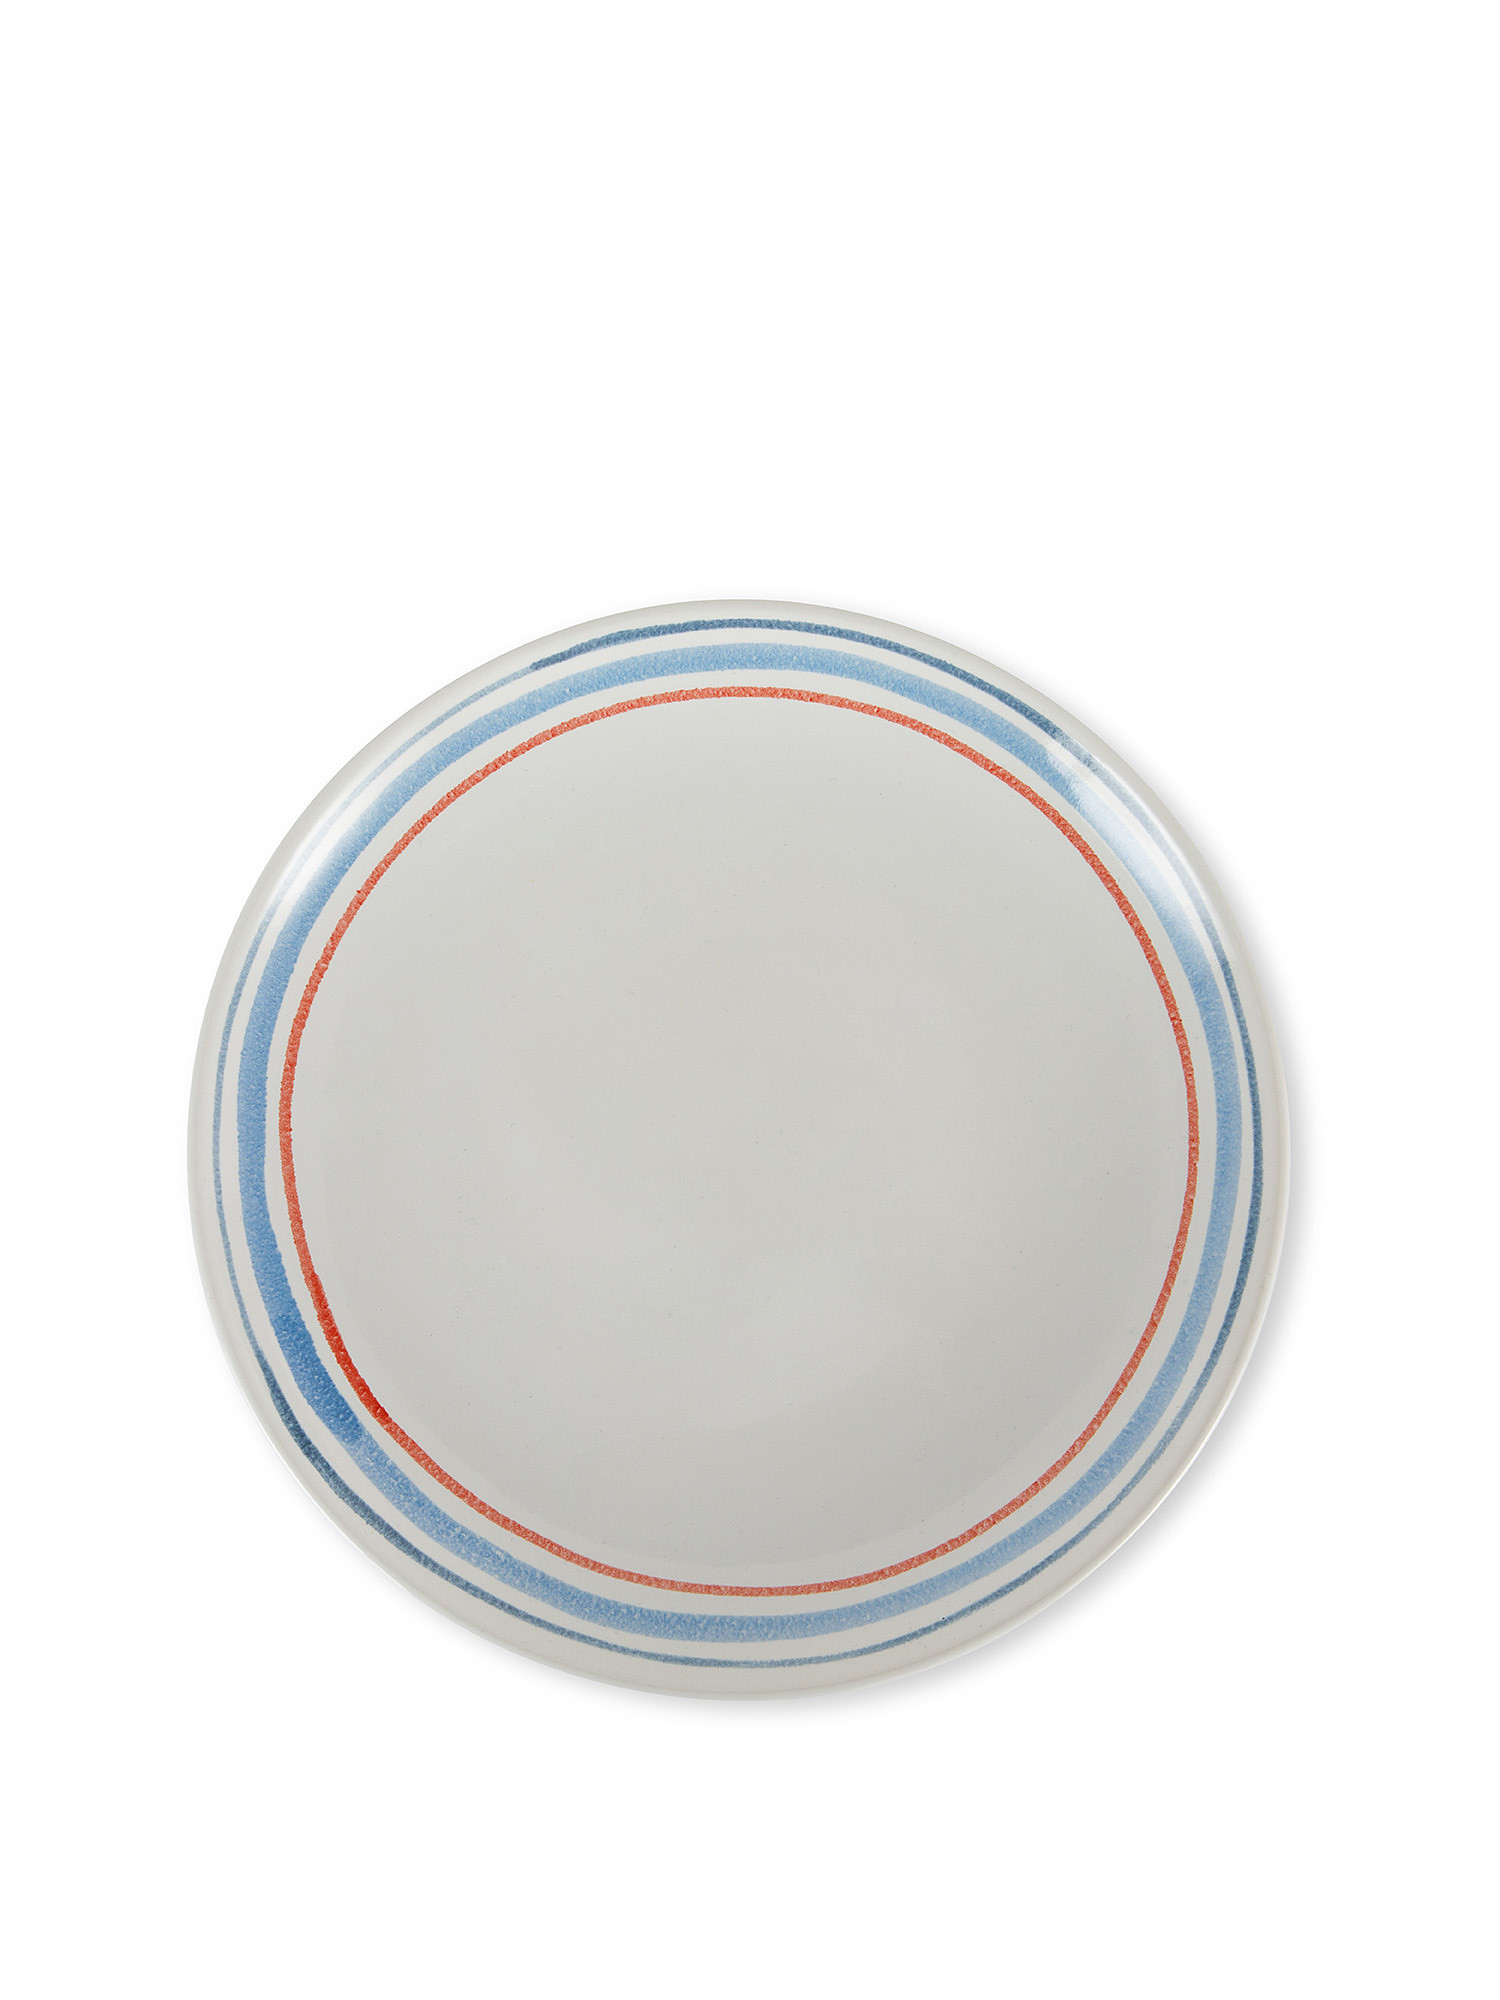 Ceramic fruit plate with lines decoration, White, large image number 0